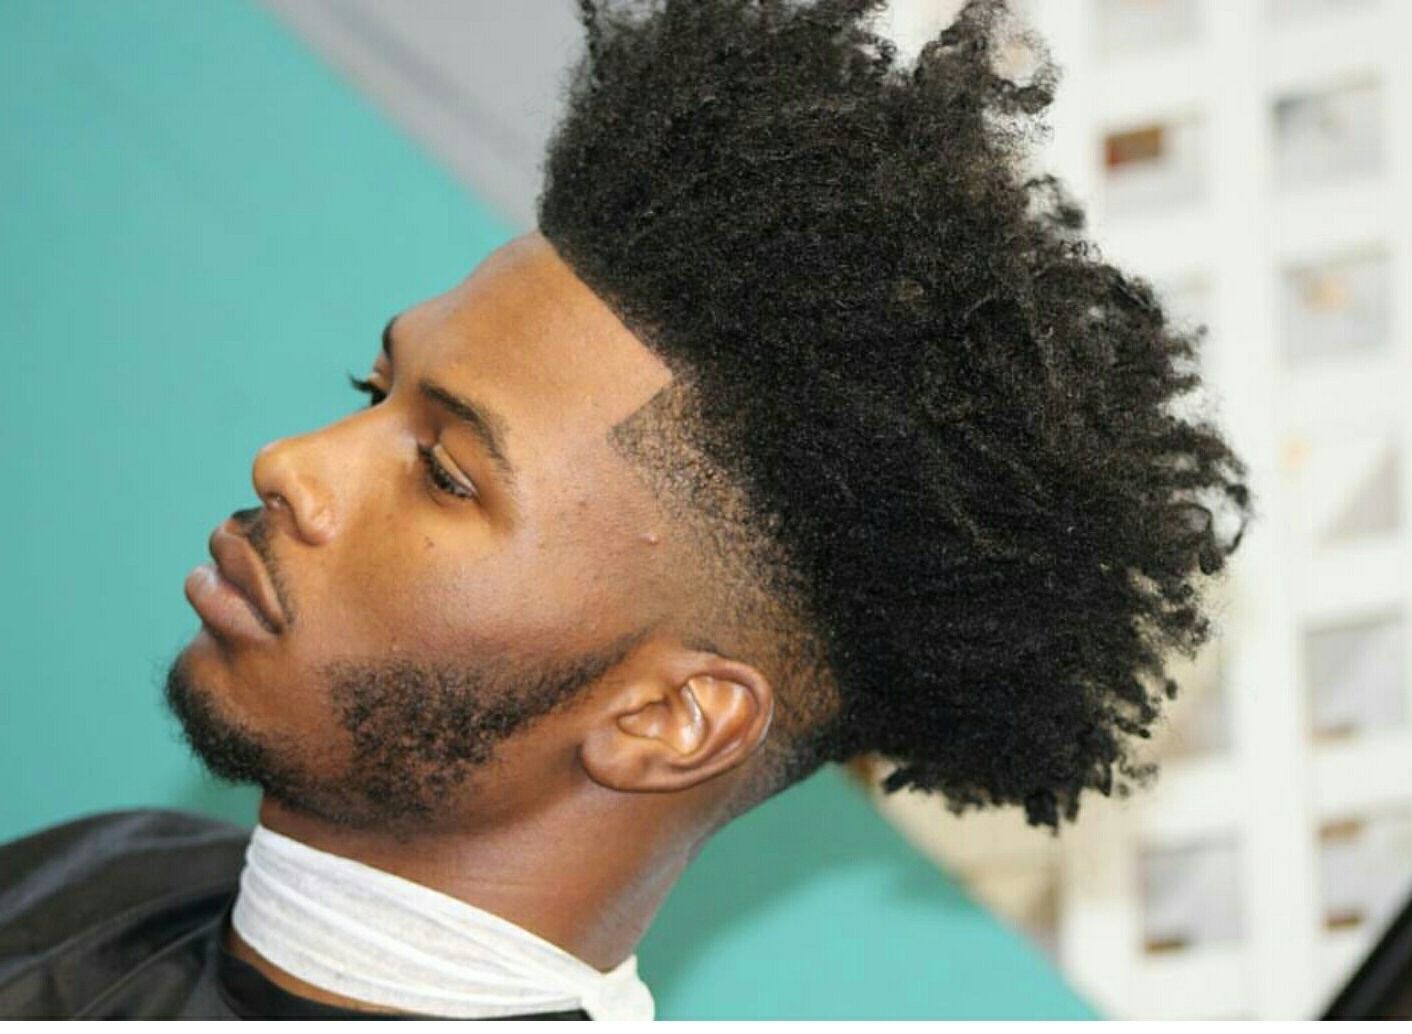 Latest Shaggy Hairstyles For Black Guys Throughout Pinmikel Staton On Hair Goals & Products (View 4 of 15)